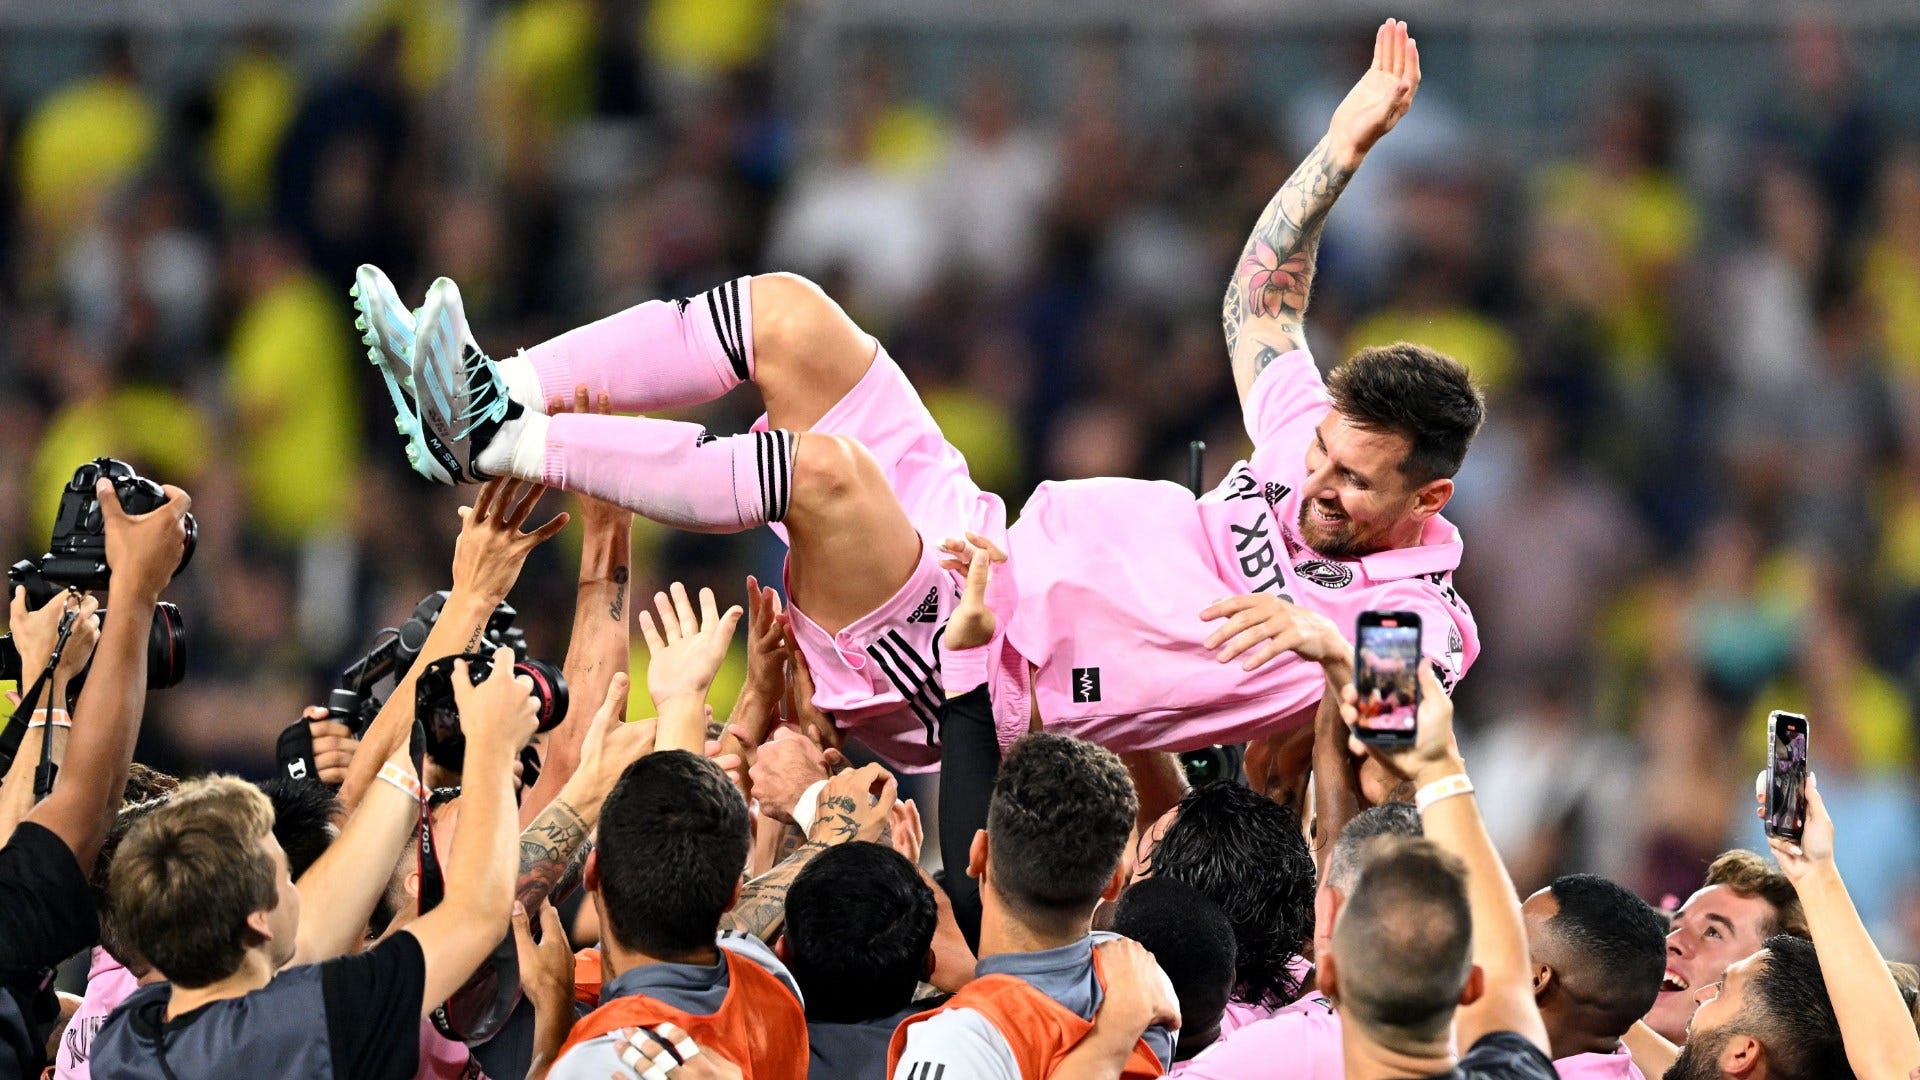 The Leagues Cup?! From now on, just christen it 'The Lionel Messi Cup'  after Inter Miami's title win